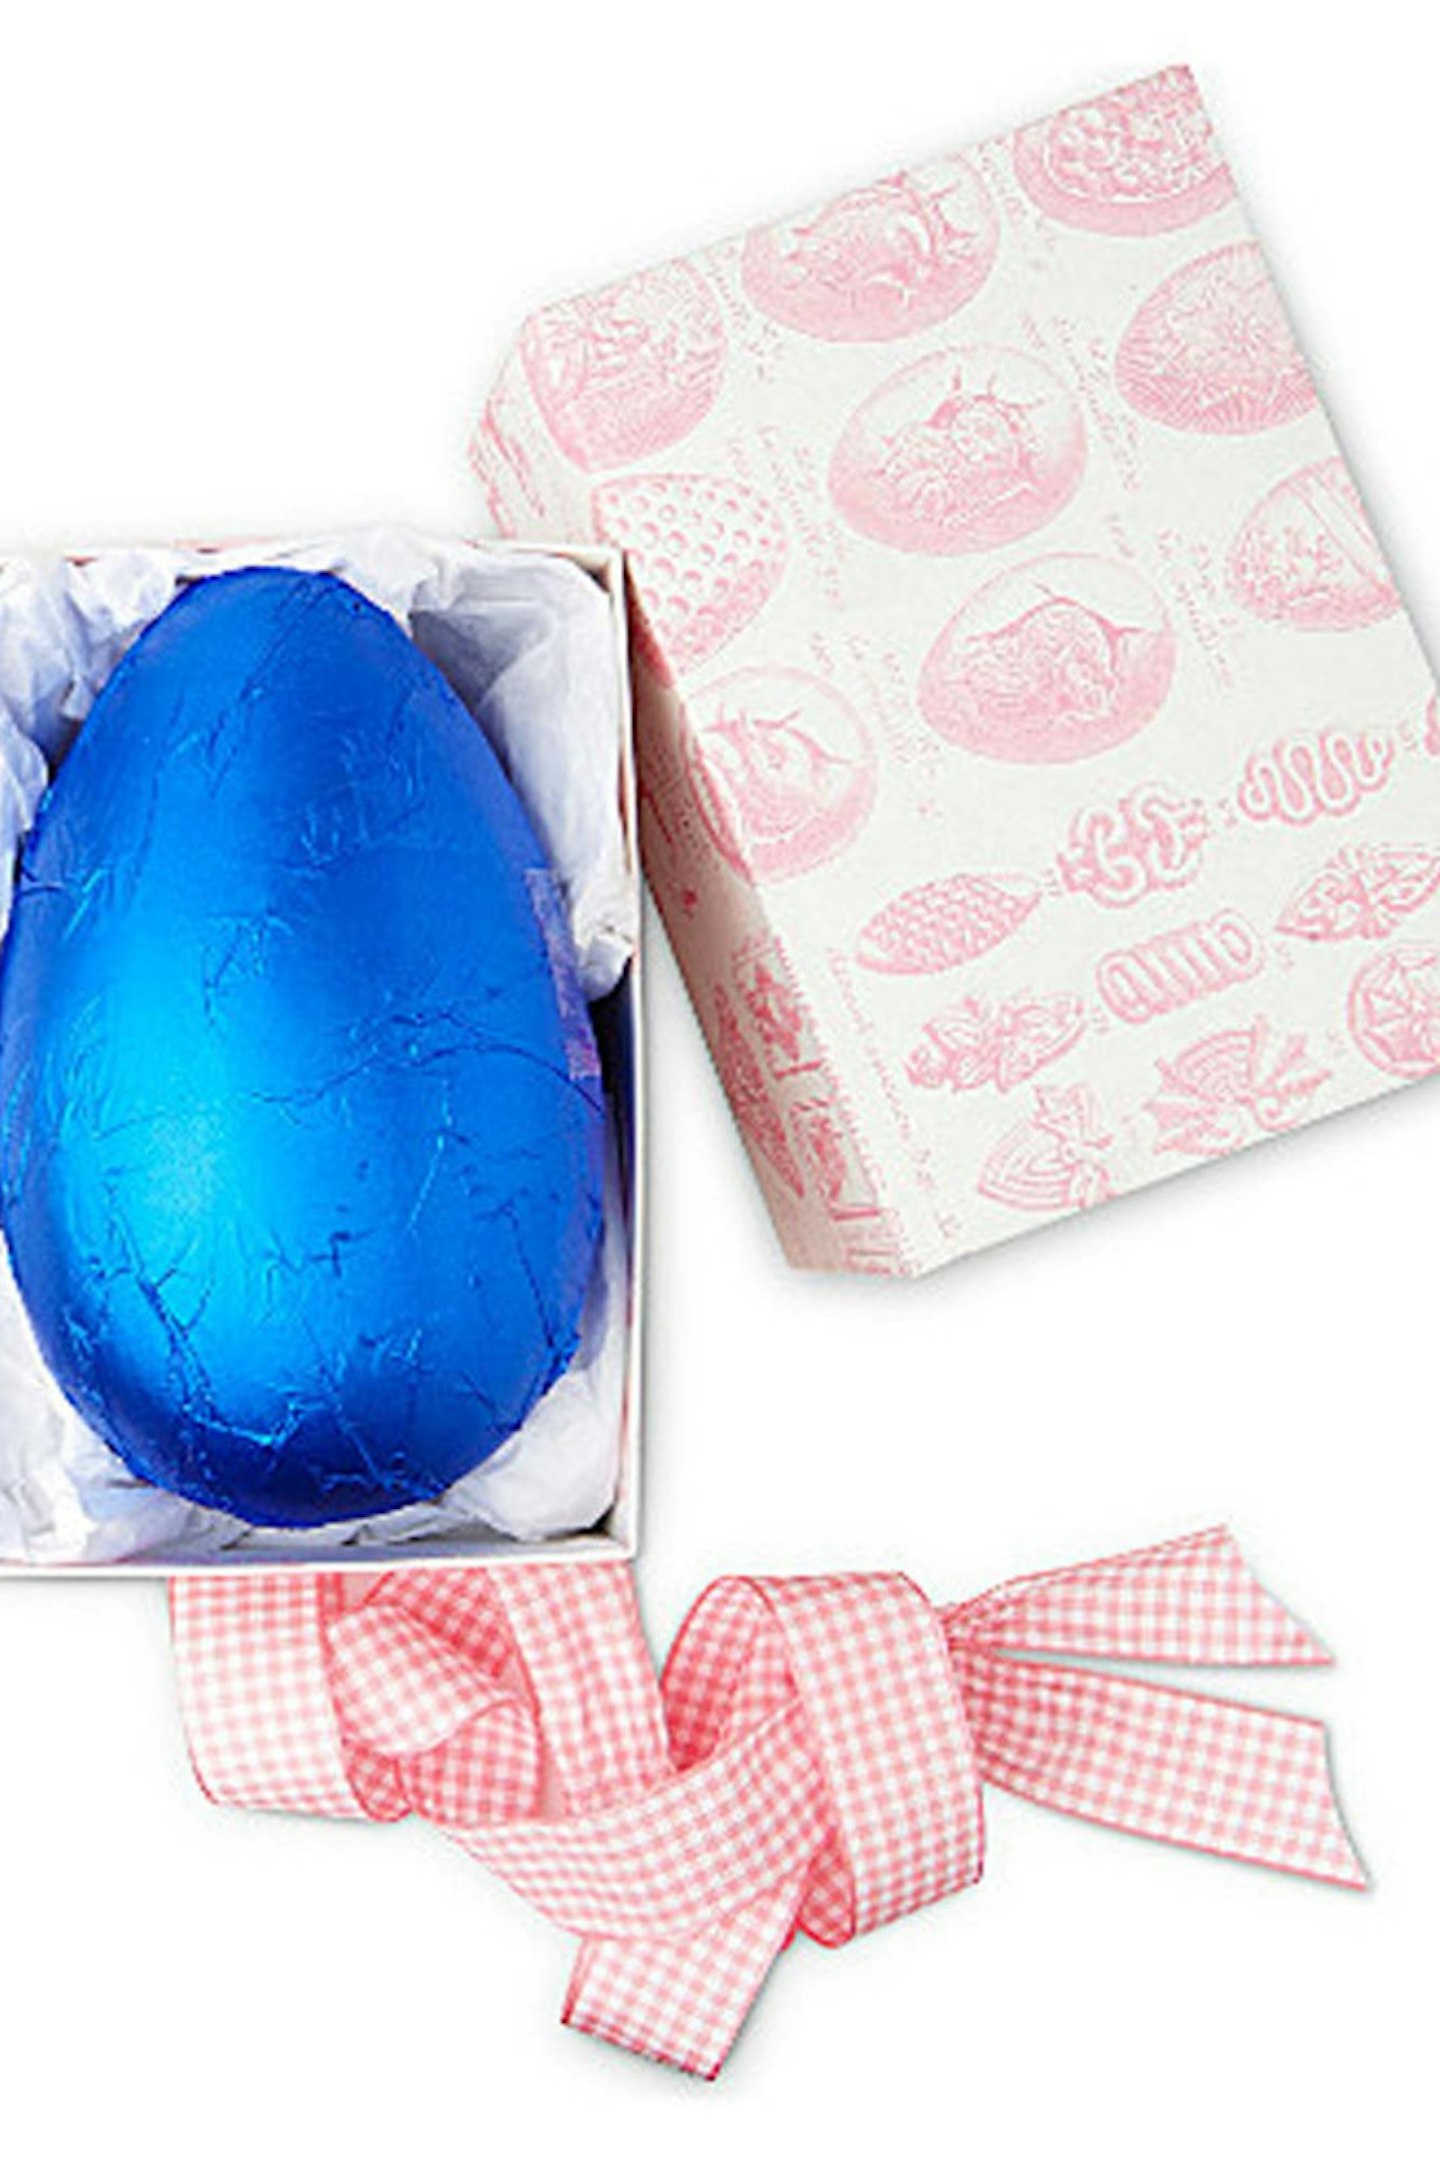 ROCOCO Pink milk chocolate easter egg 220g £19.99 selfirdhes